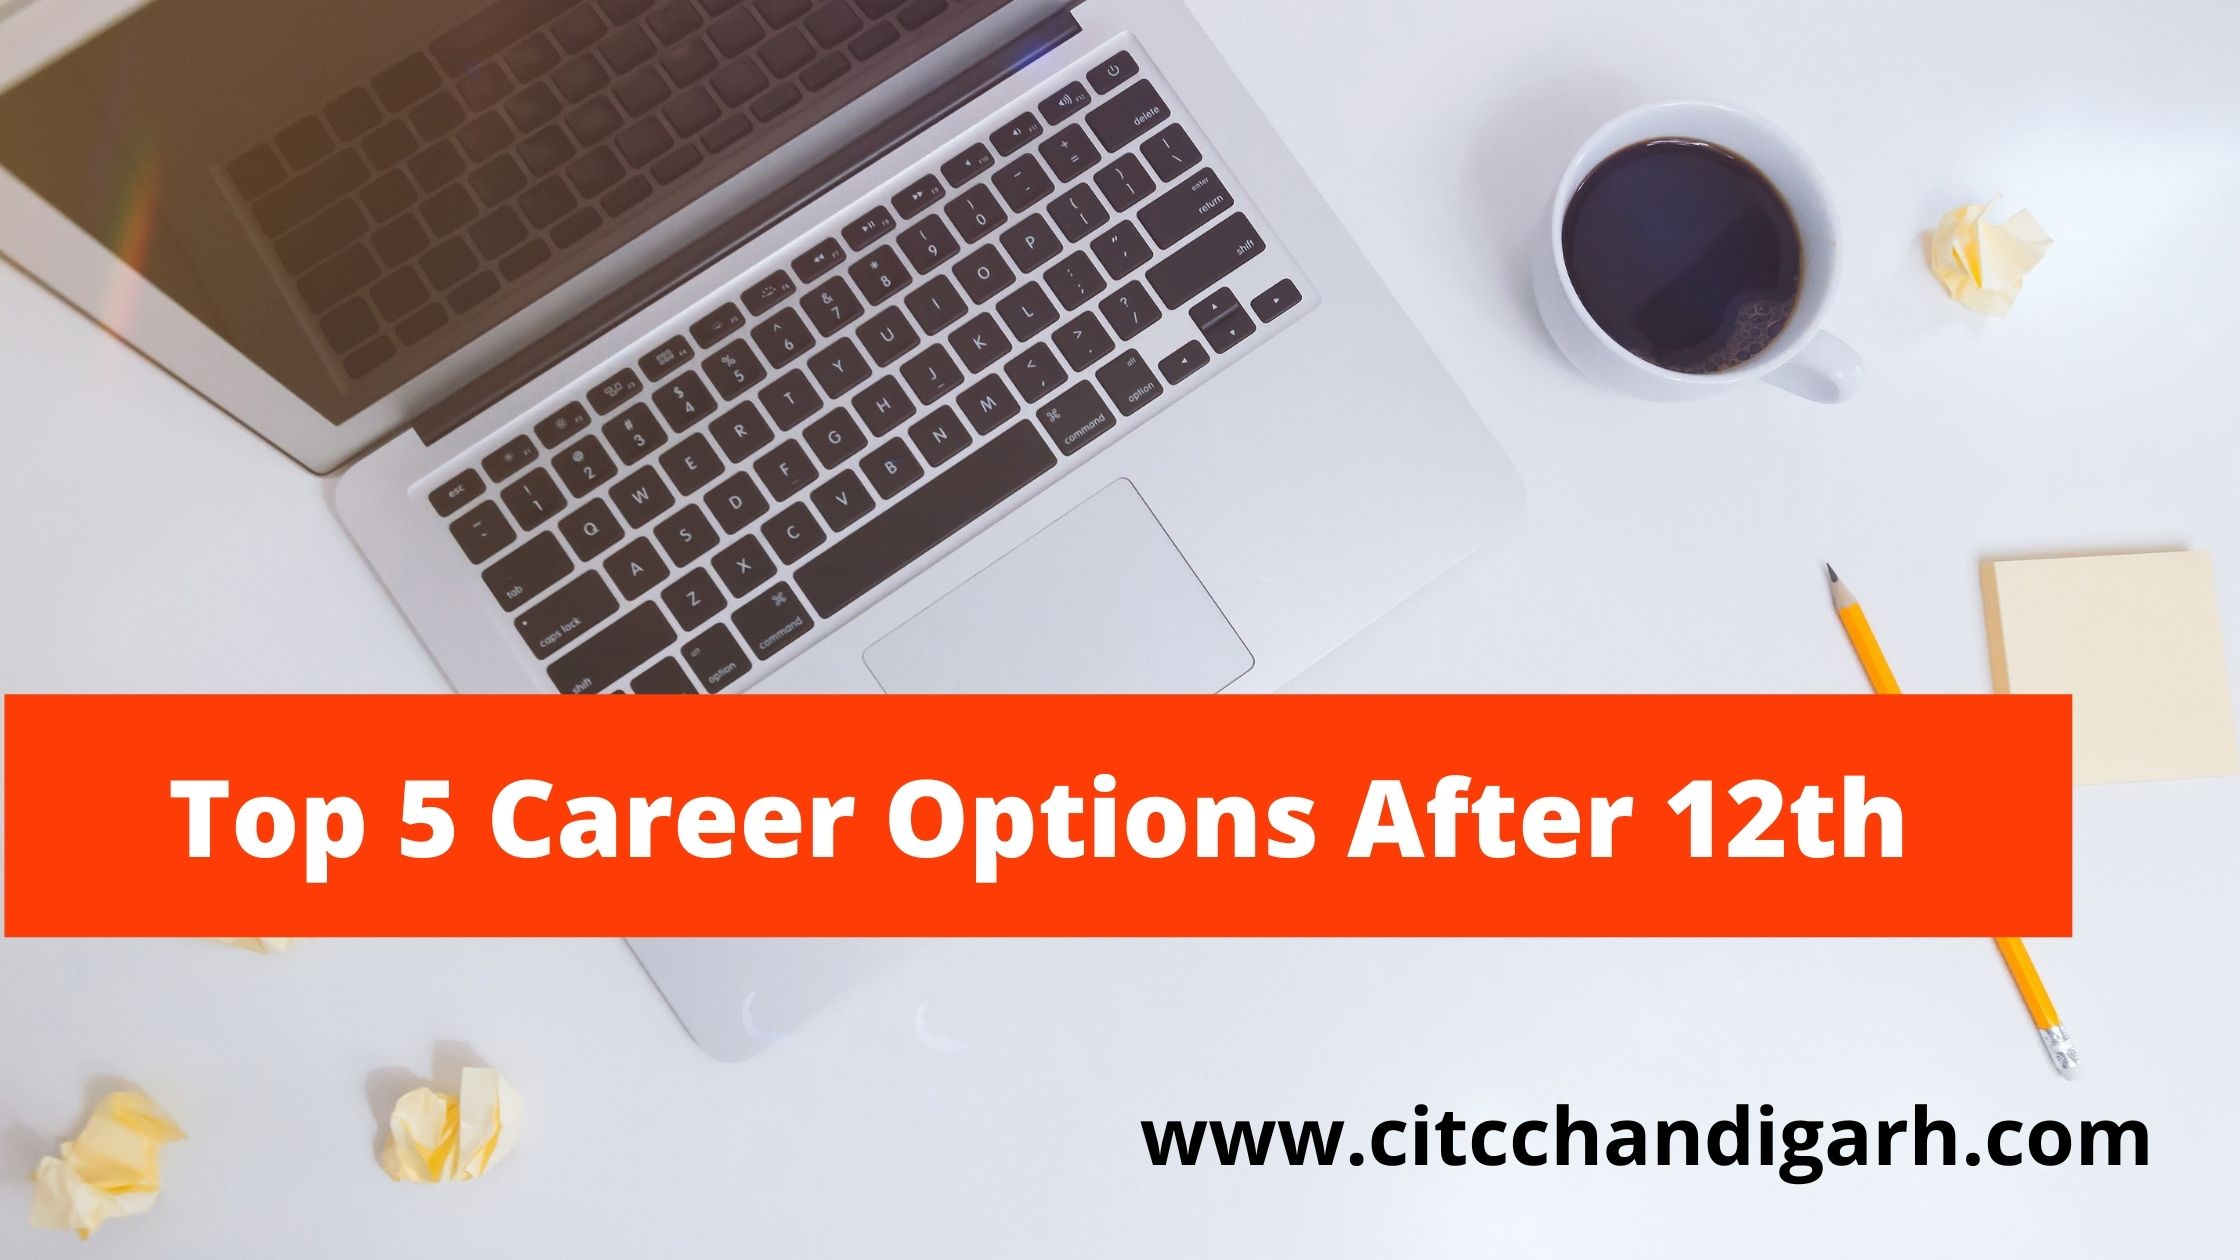 Top 5 Career Options after 12th